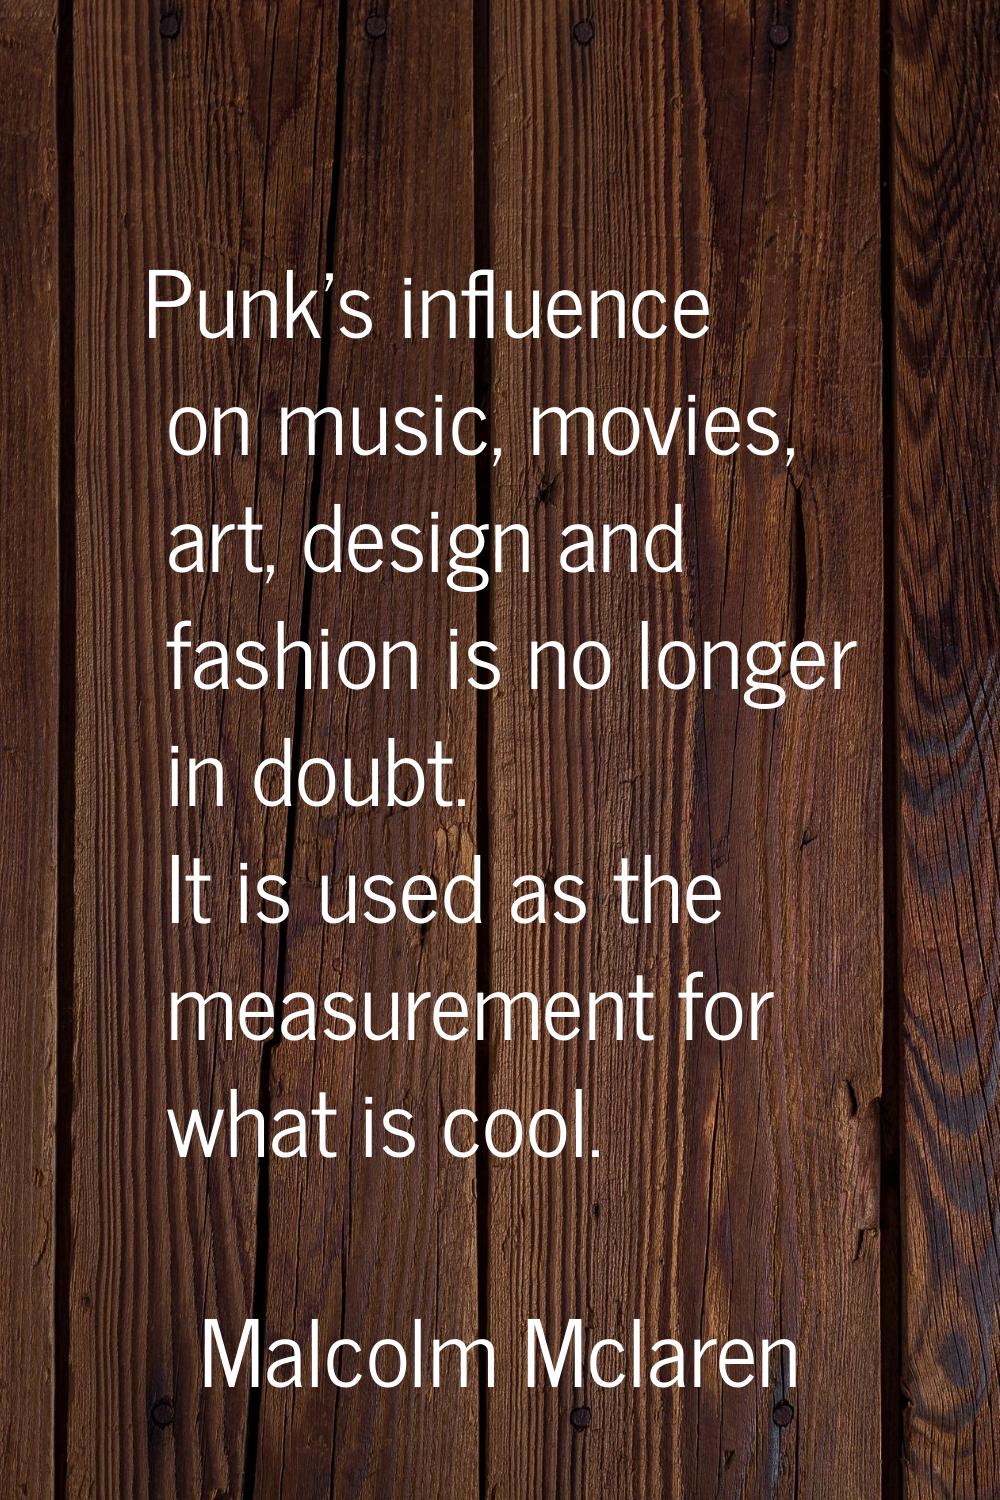 Punk's influence on music, movies, art, design and fashion is no longer in doubt. It is used as the